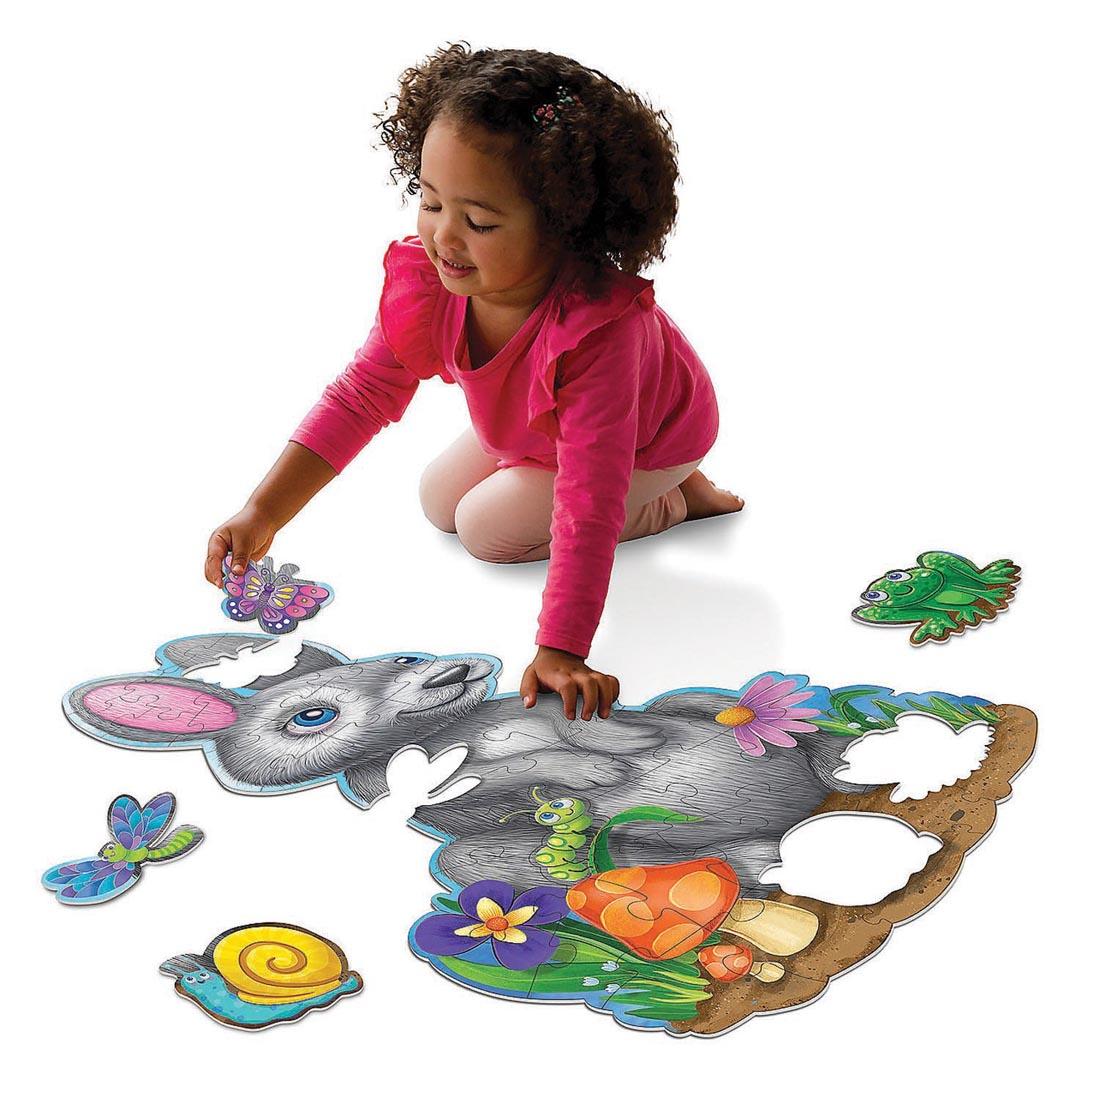 Child completing the Bunny Floor Puzzle by Peaceable Kingdom